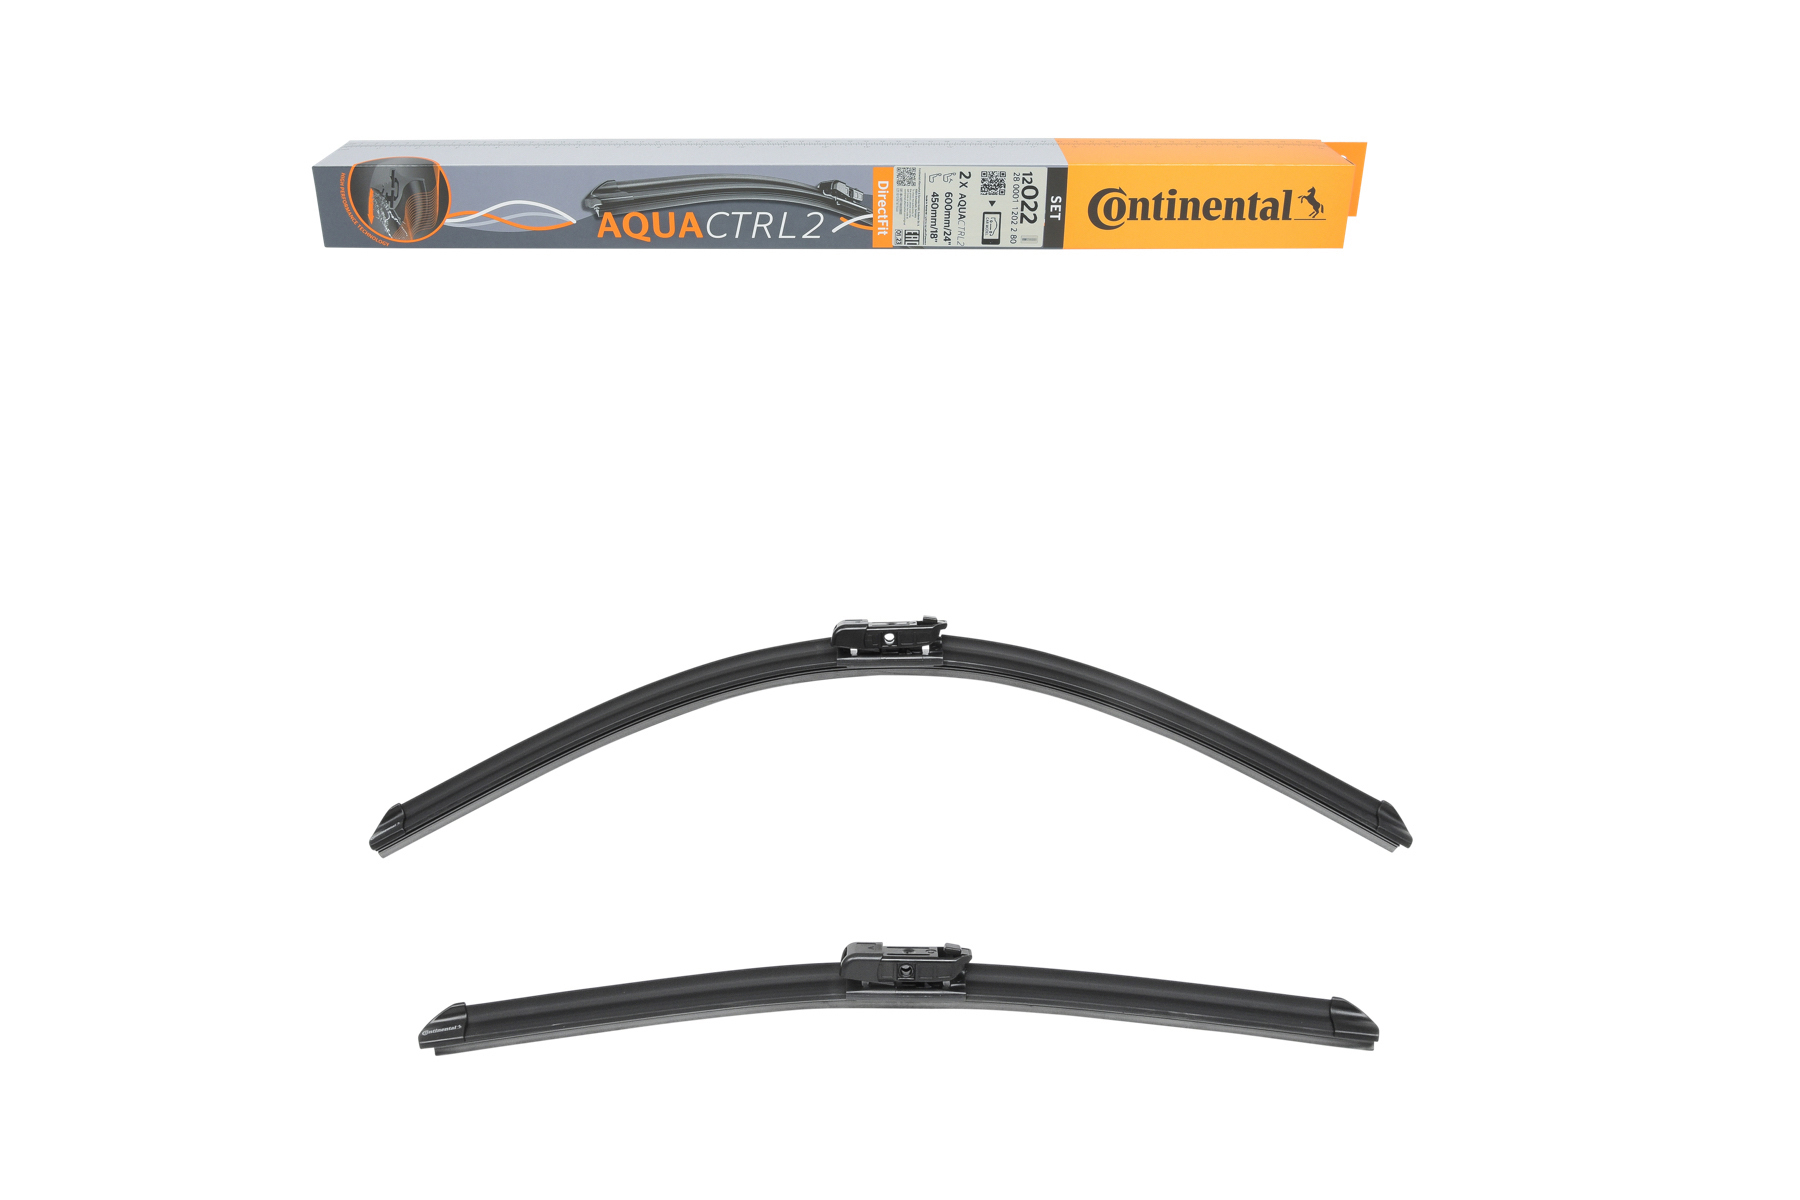 2800011202280 Continental Windscreen wipers KIA 600, 450 mm Front, Flat wiper blade, with spoiler, 24/18 Inch